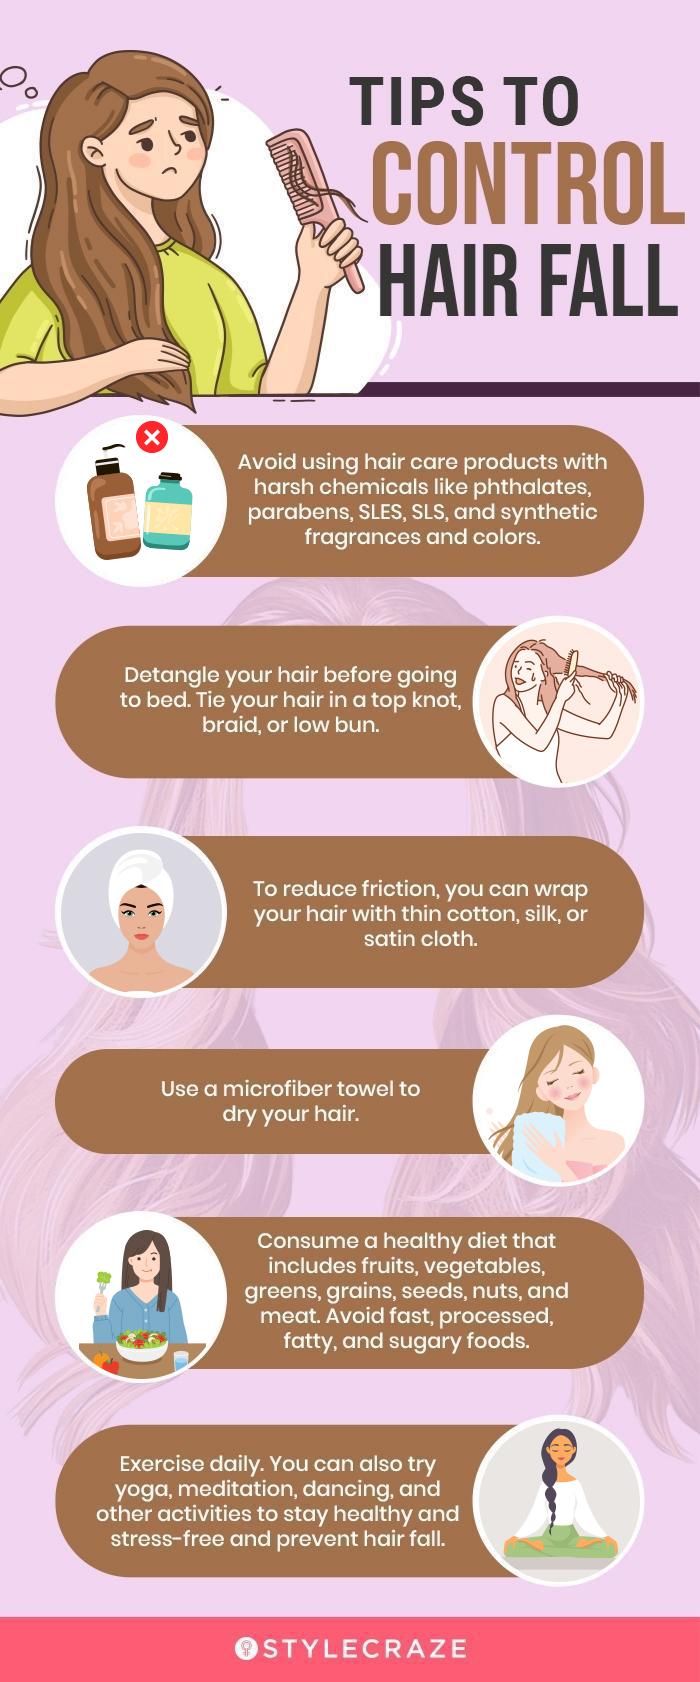 Hair Loss Treatments for Women: Medications, Shampoos, and More